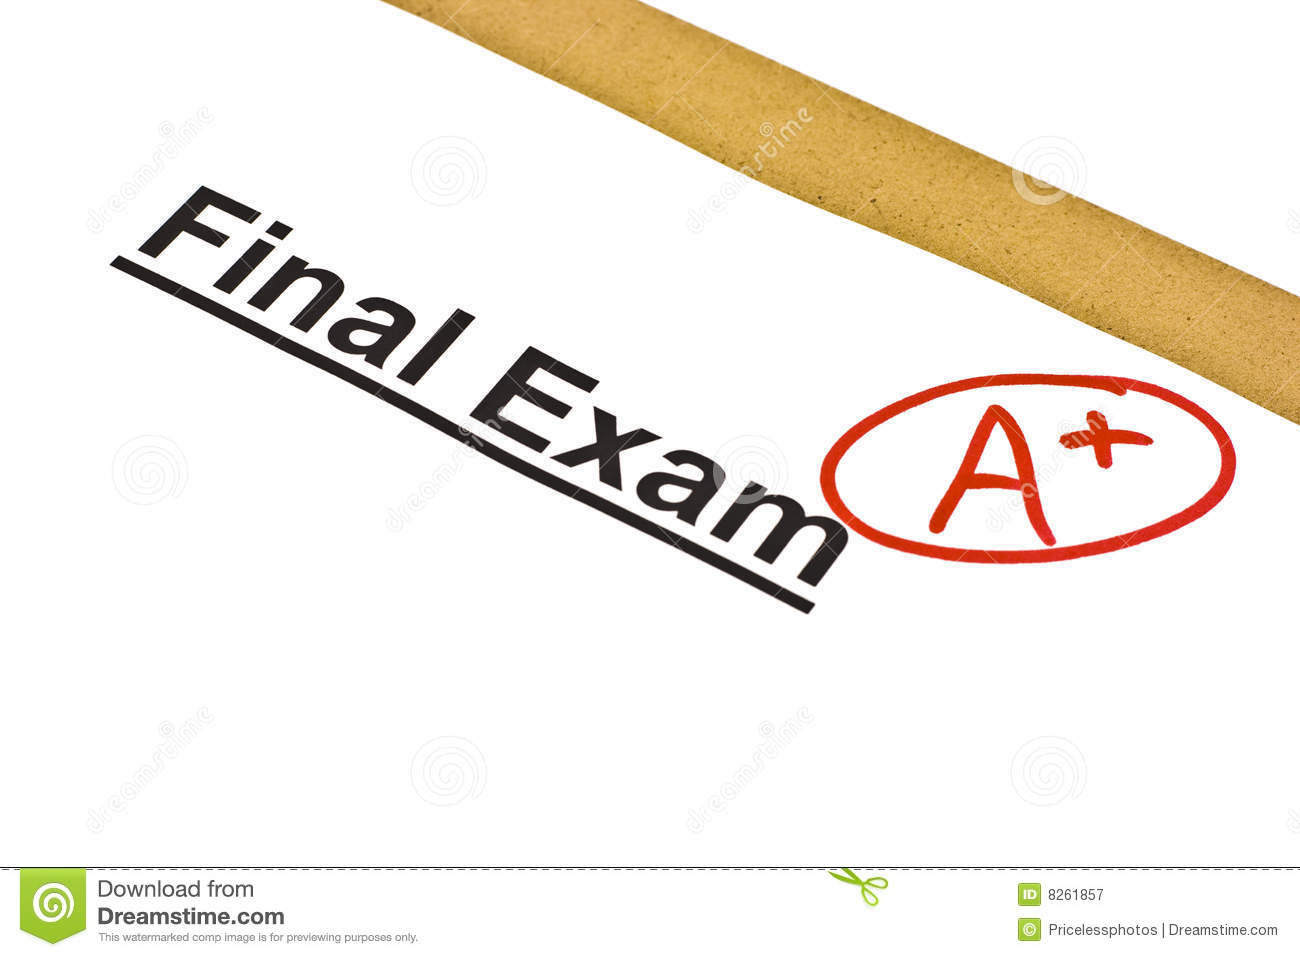 Amazing Final Exam Pictures & Backgrounds